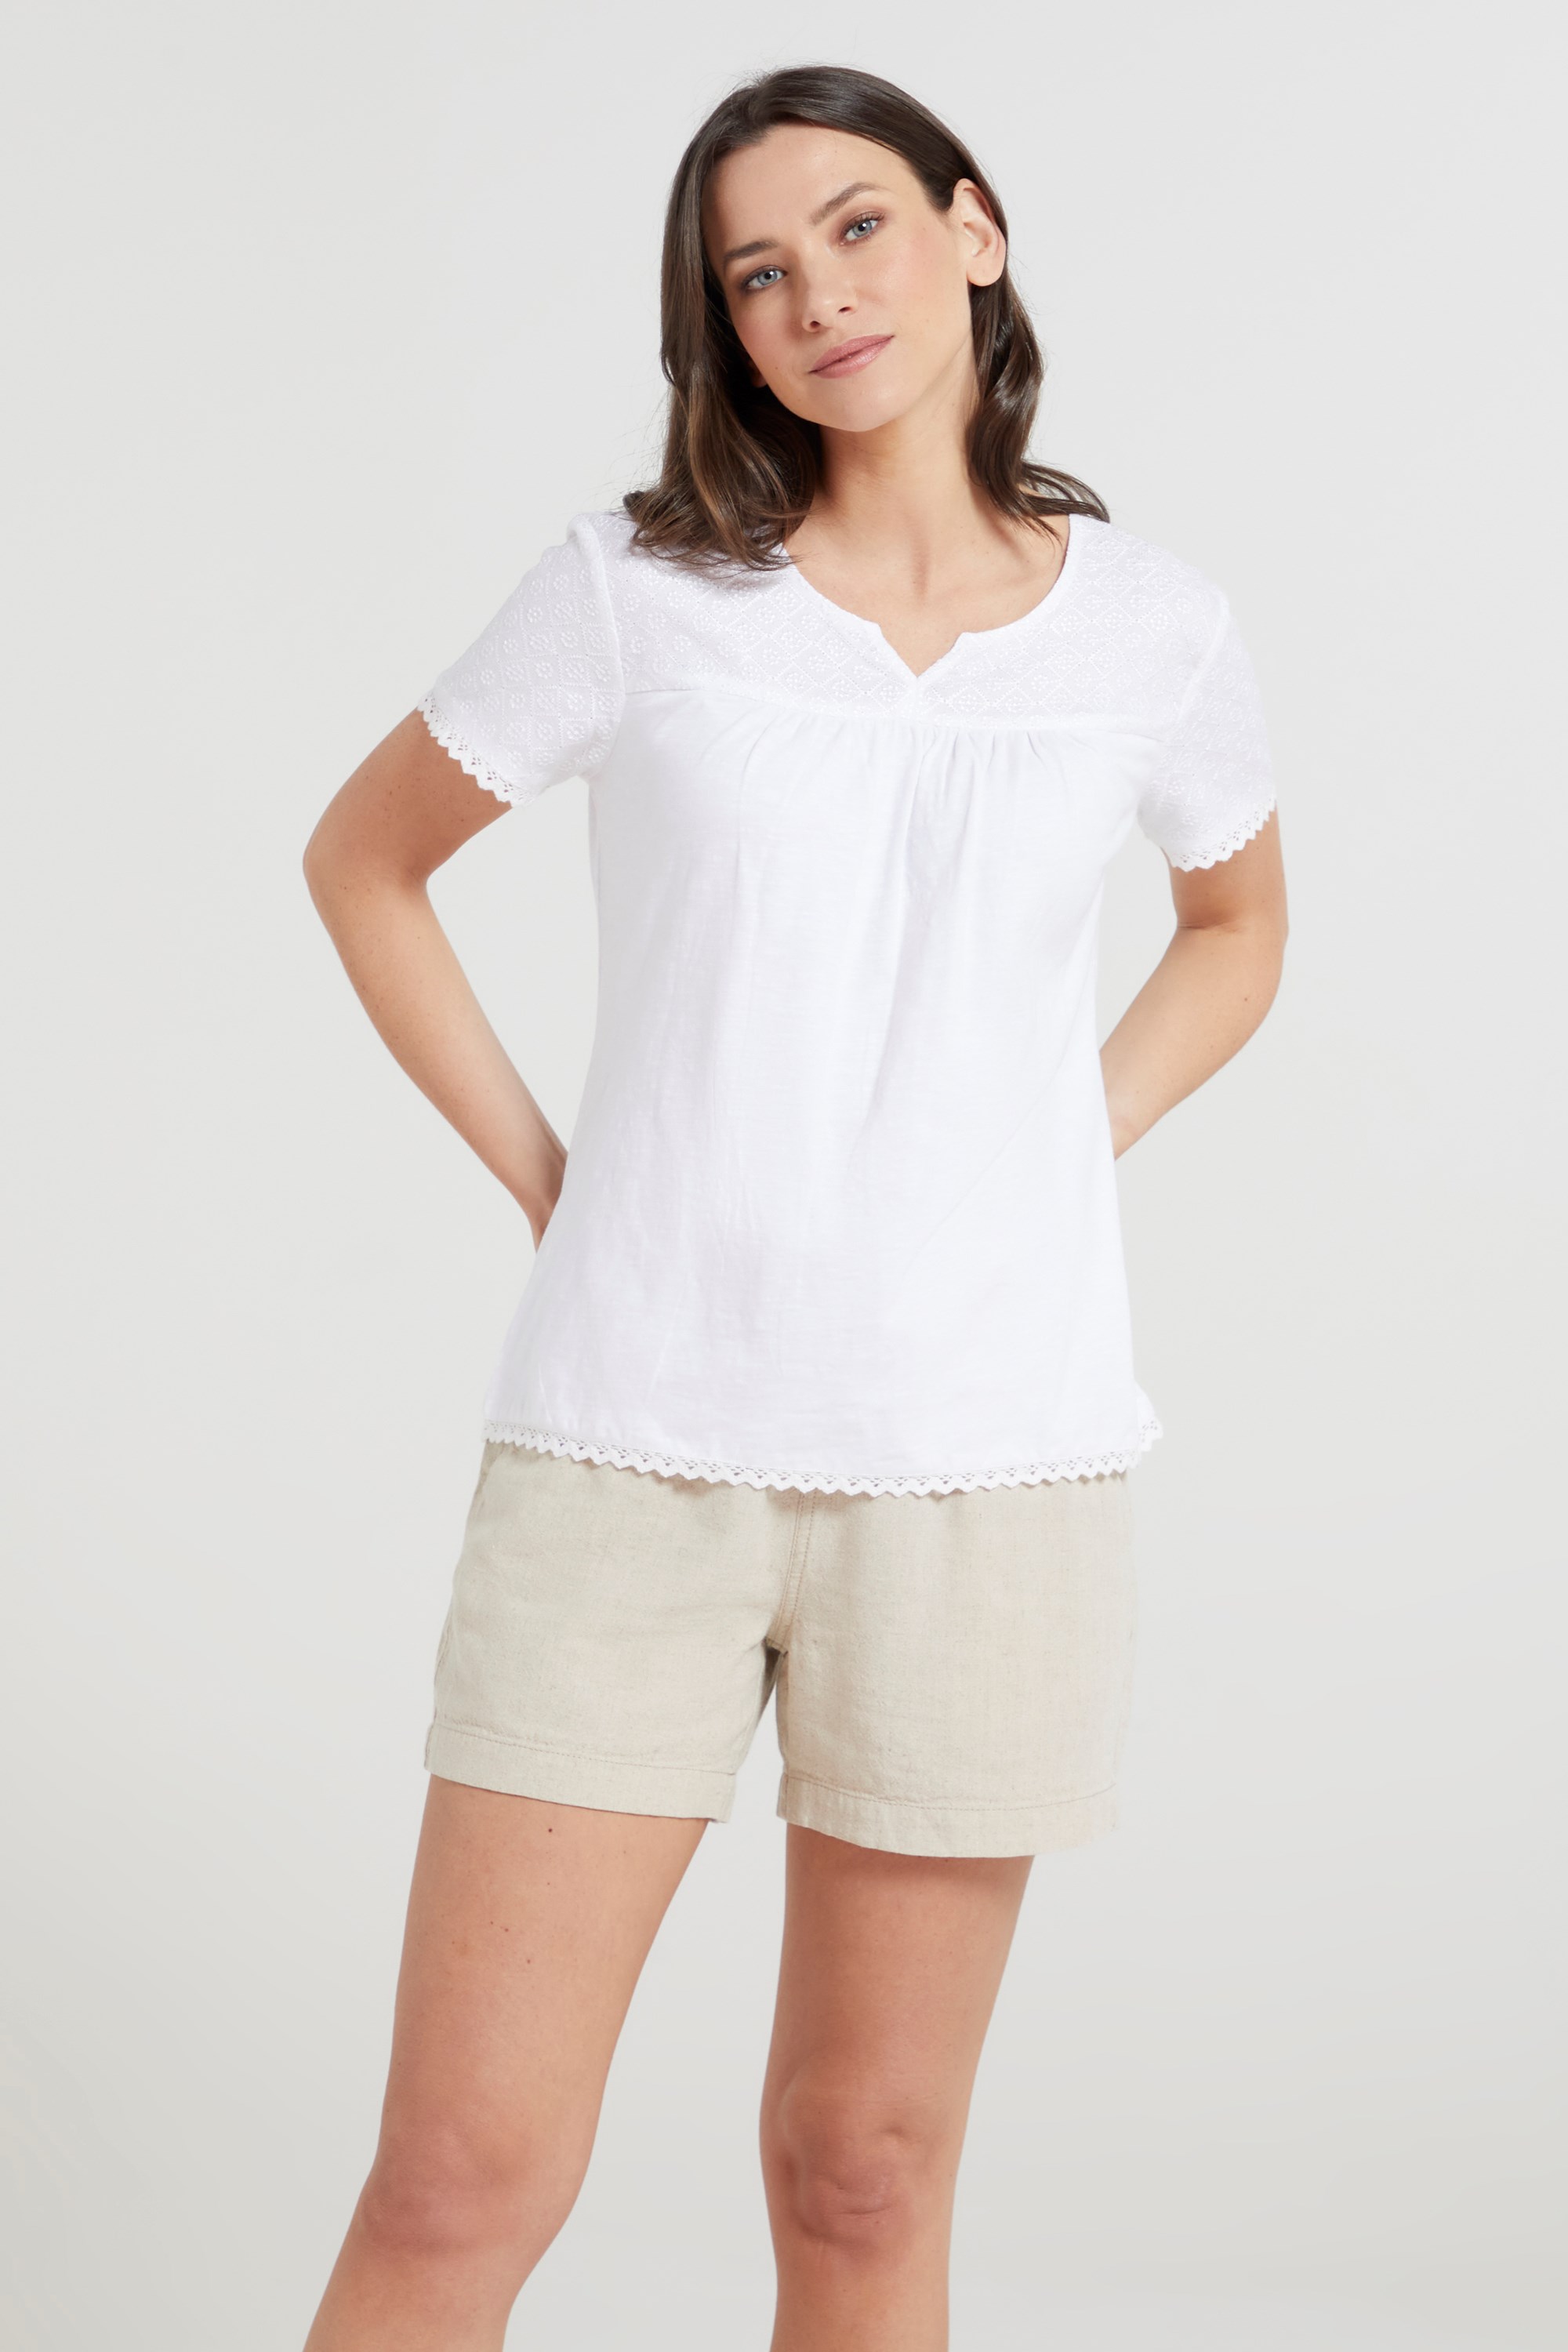 035492 NAPLES EMBROIDERED WOMENS TOP